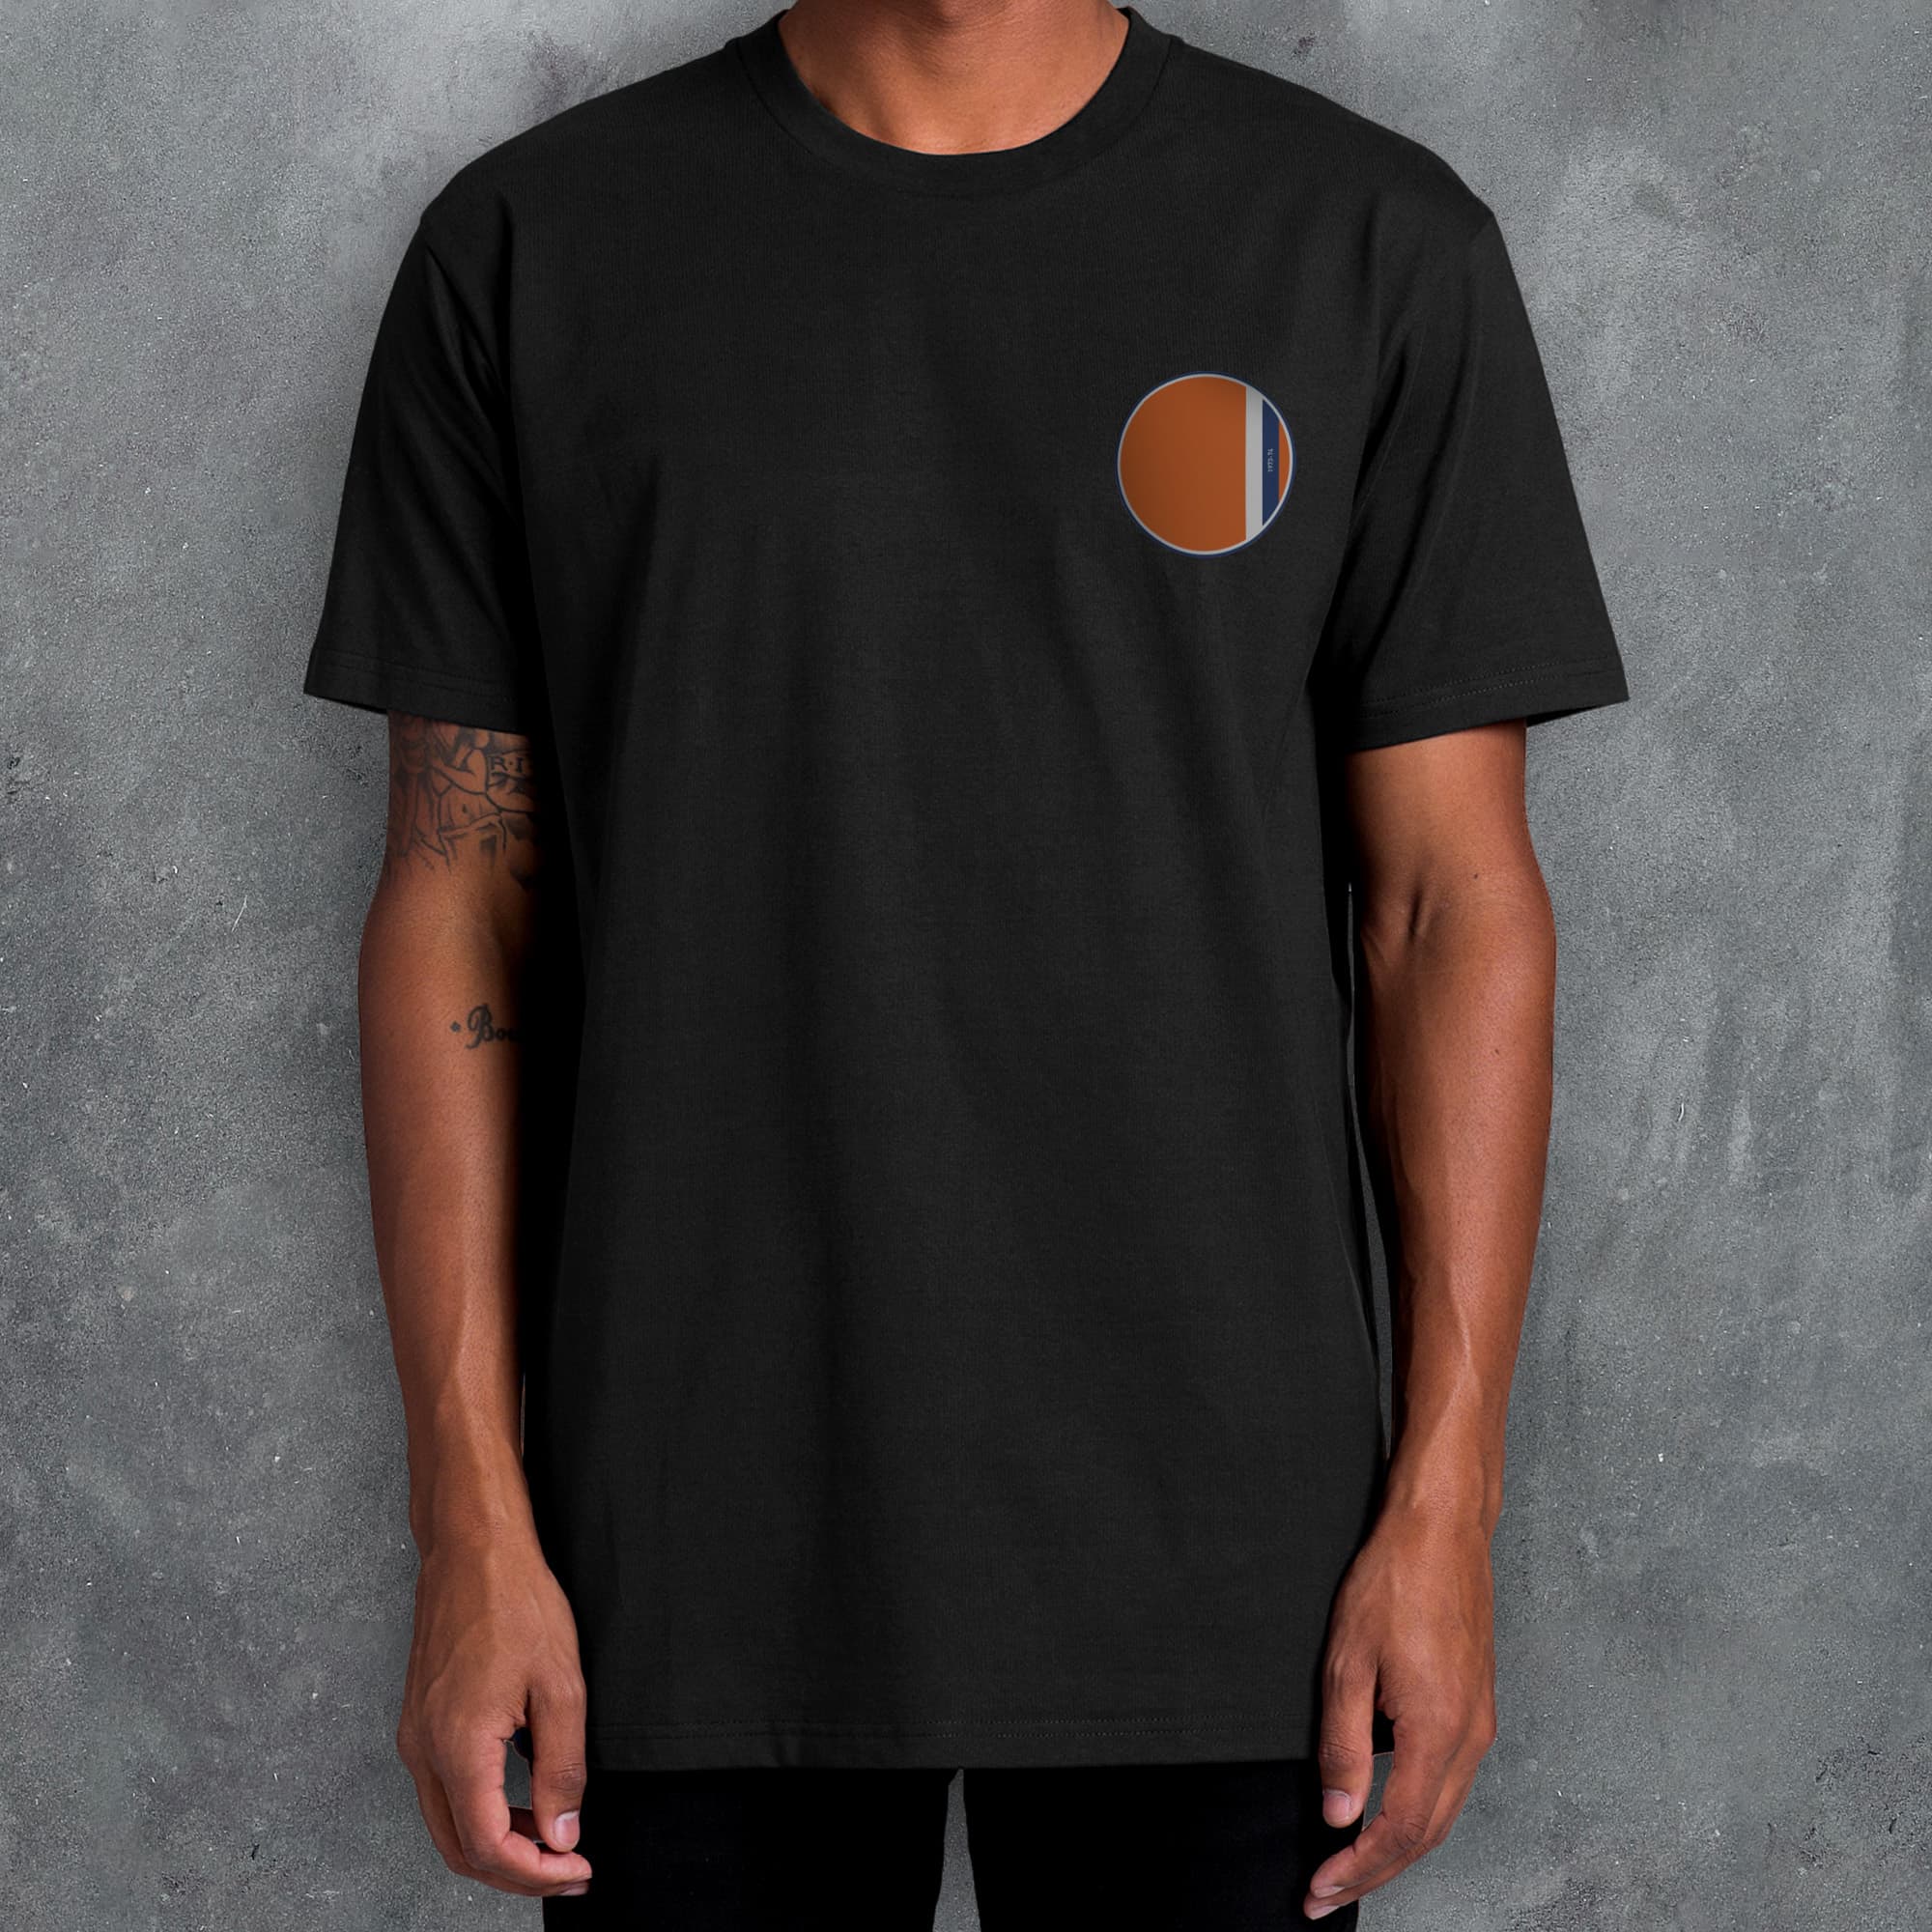 a man wearing a black t - shirt with an orange circle on it